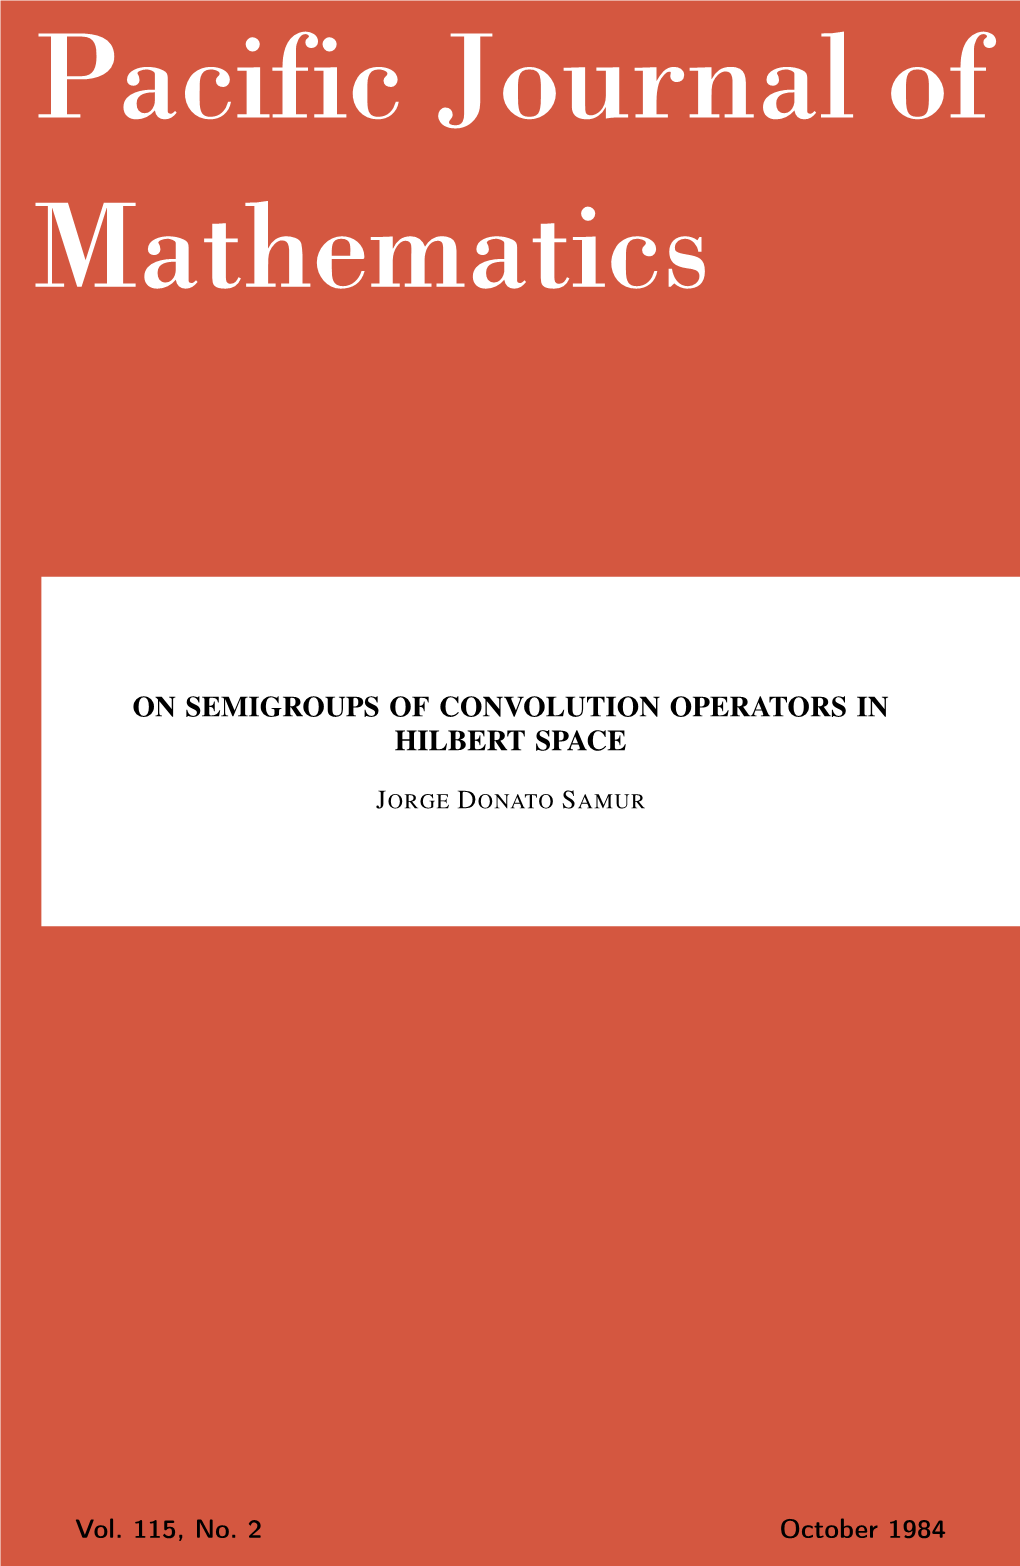 On Semigroups of Convolution Operators in Hilbert Space